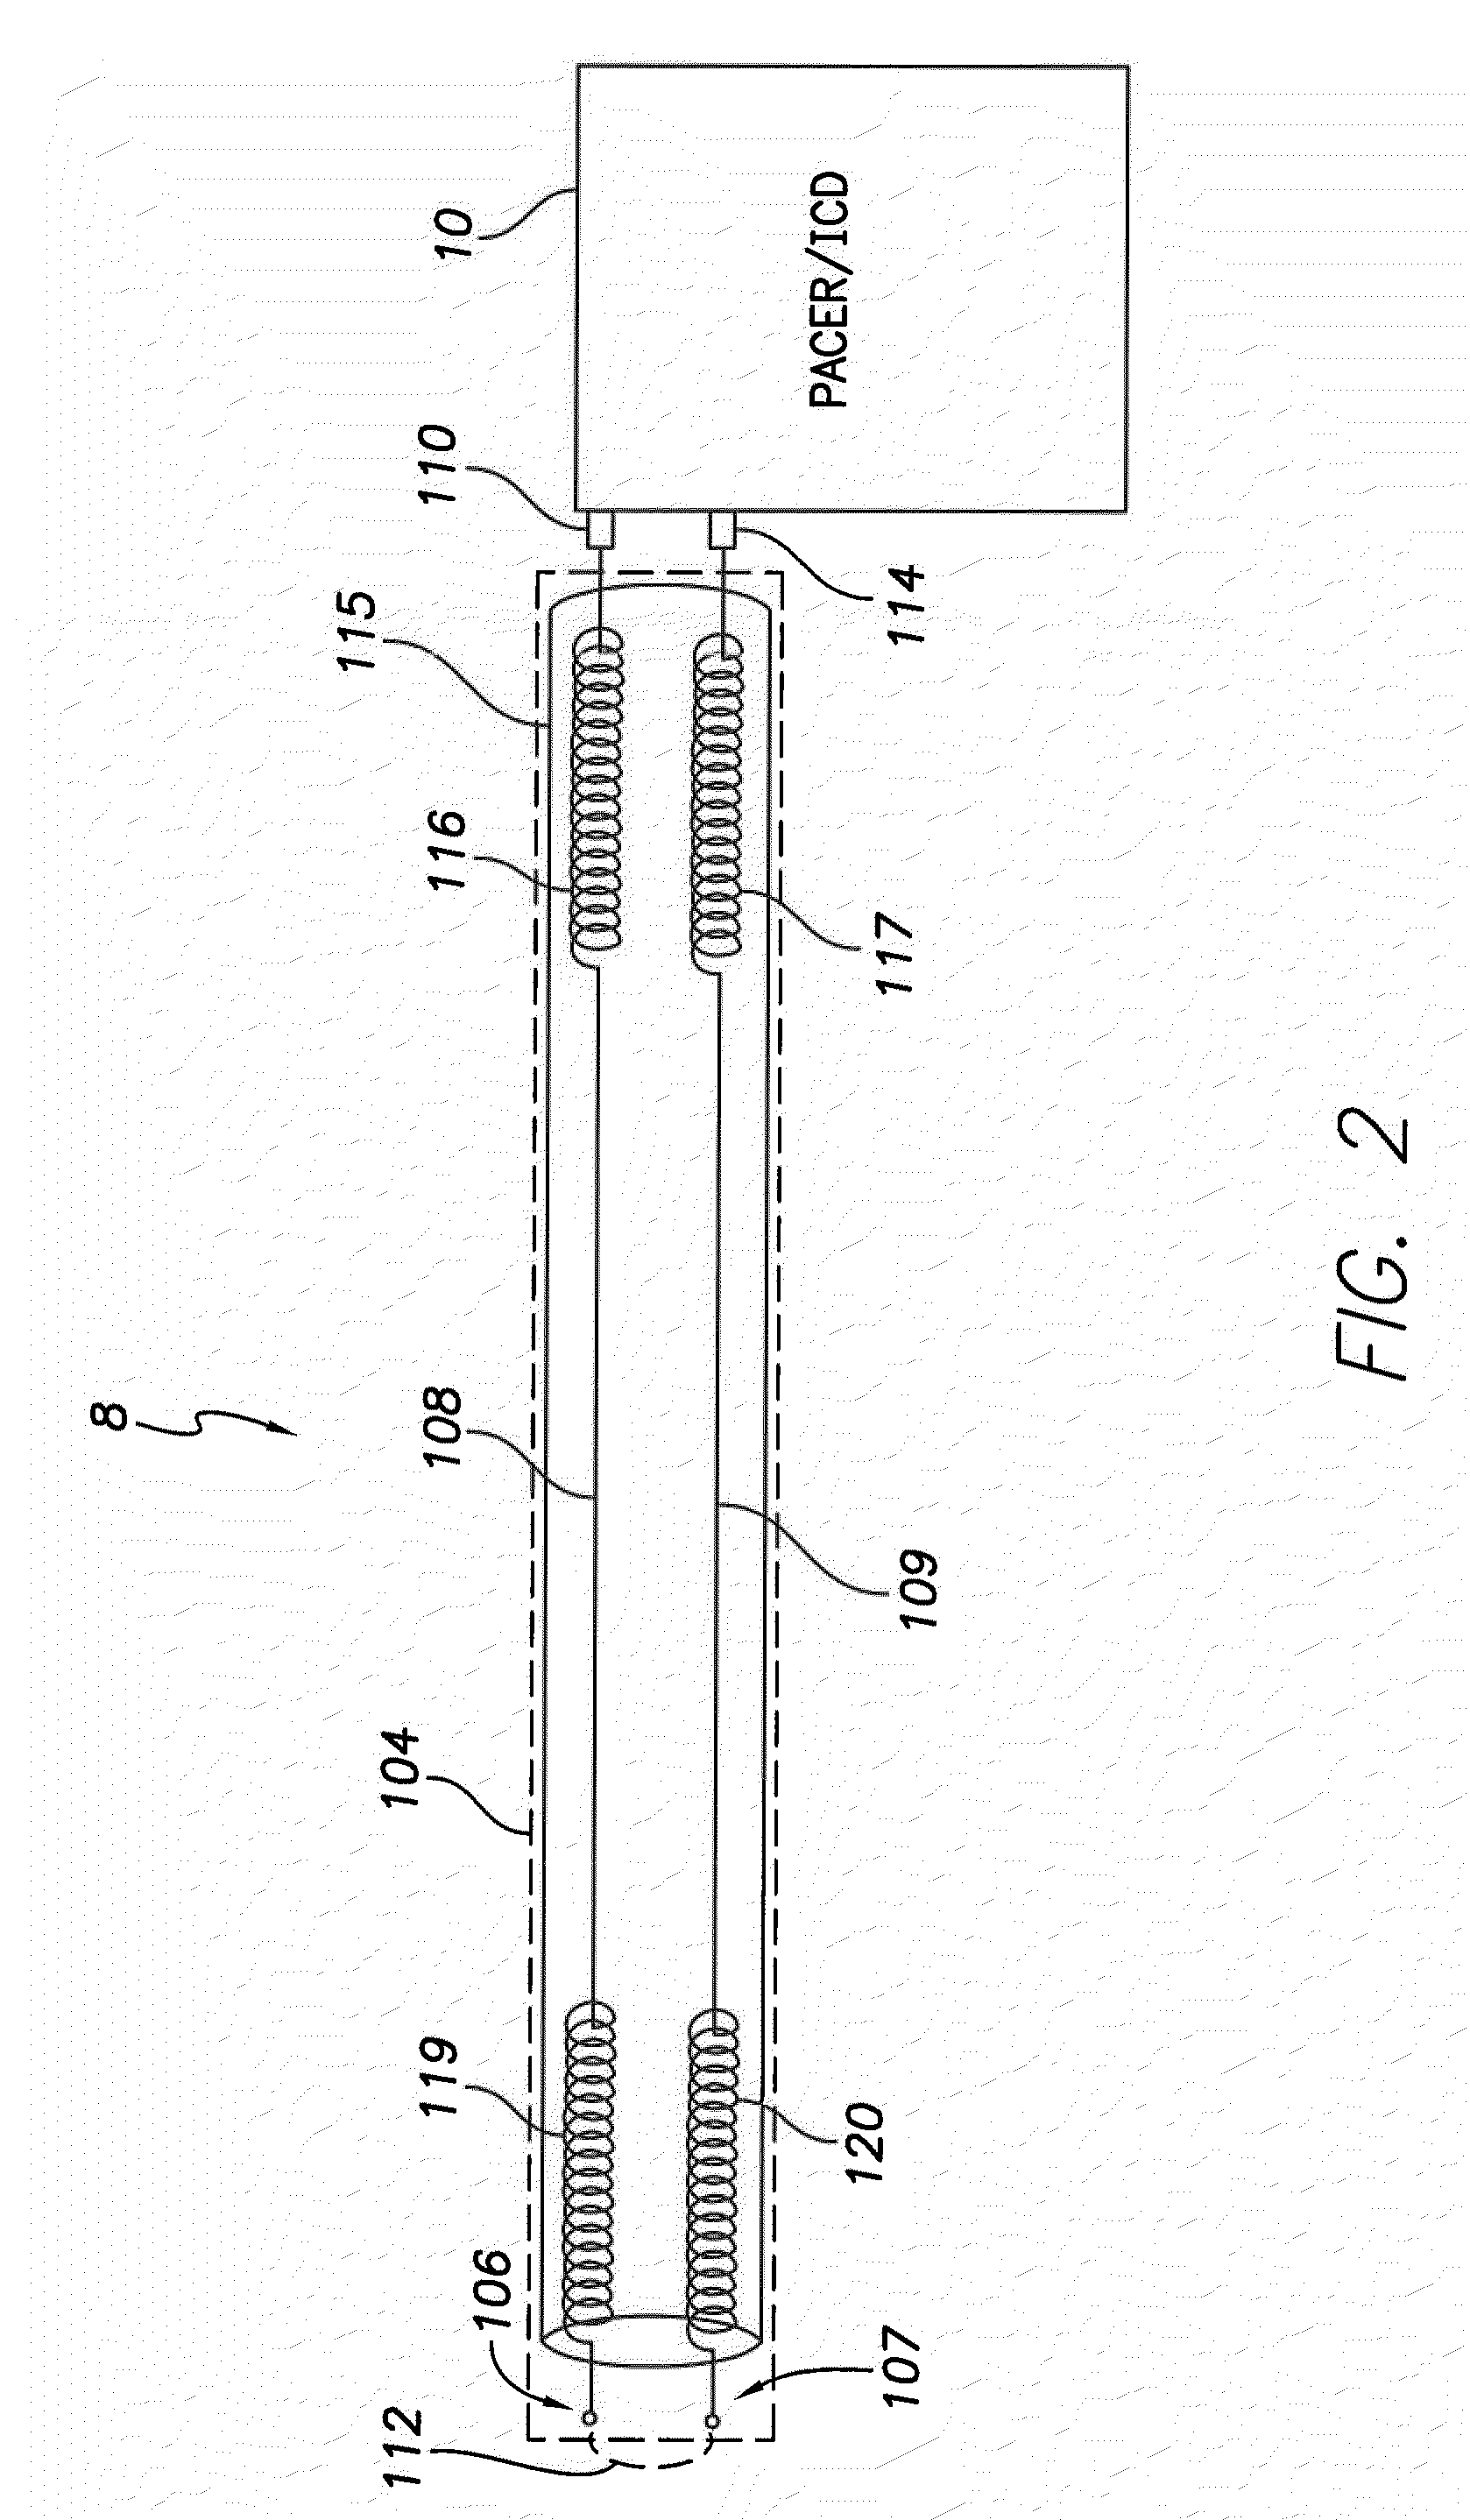 Implantable medical device lead incorporating a conductive sheath surrounding insulated coils to reduce lead heating during MRI